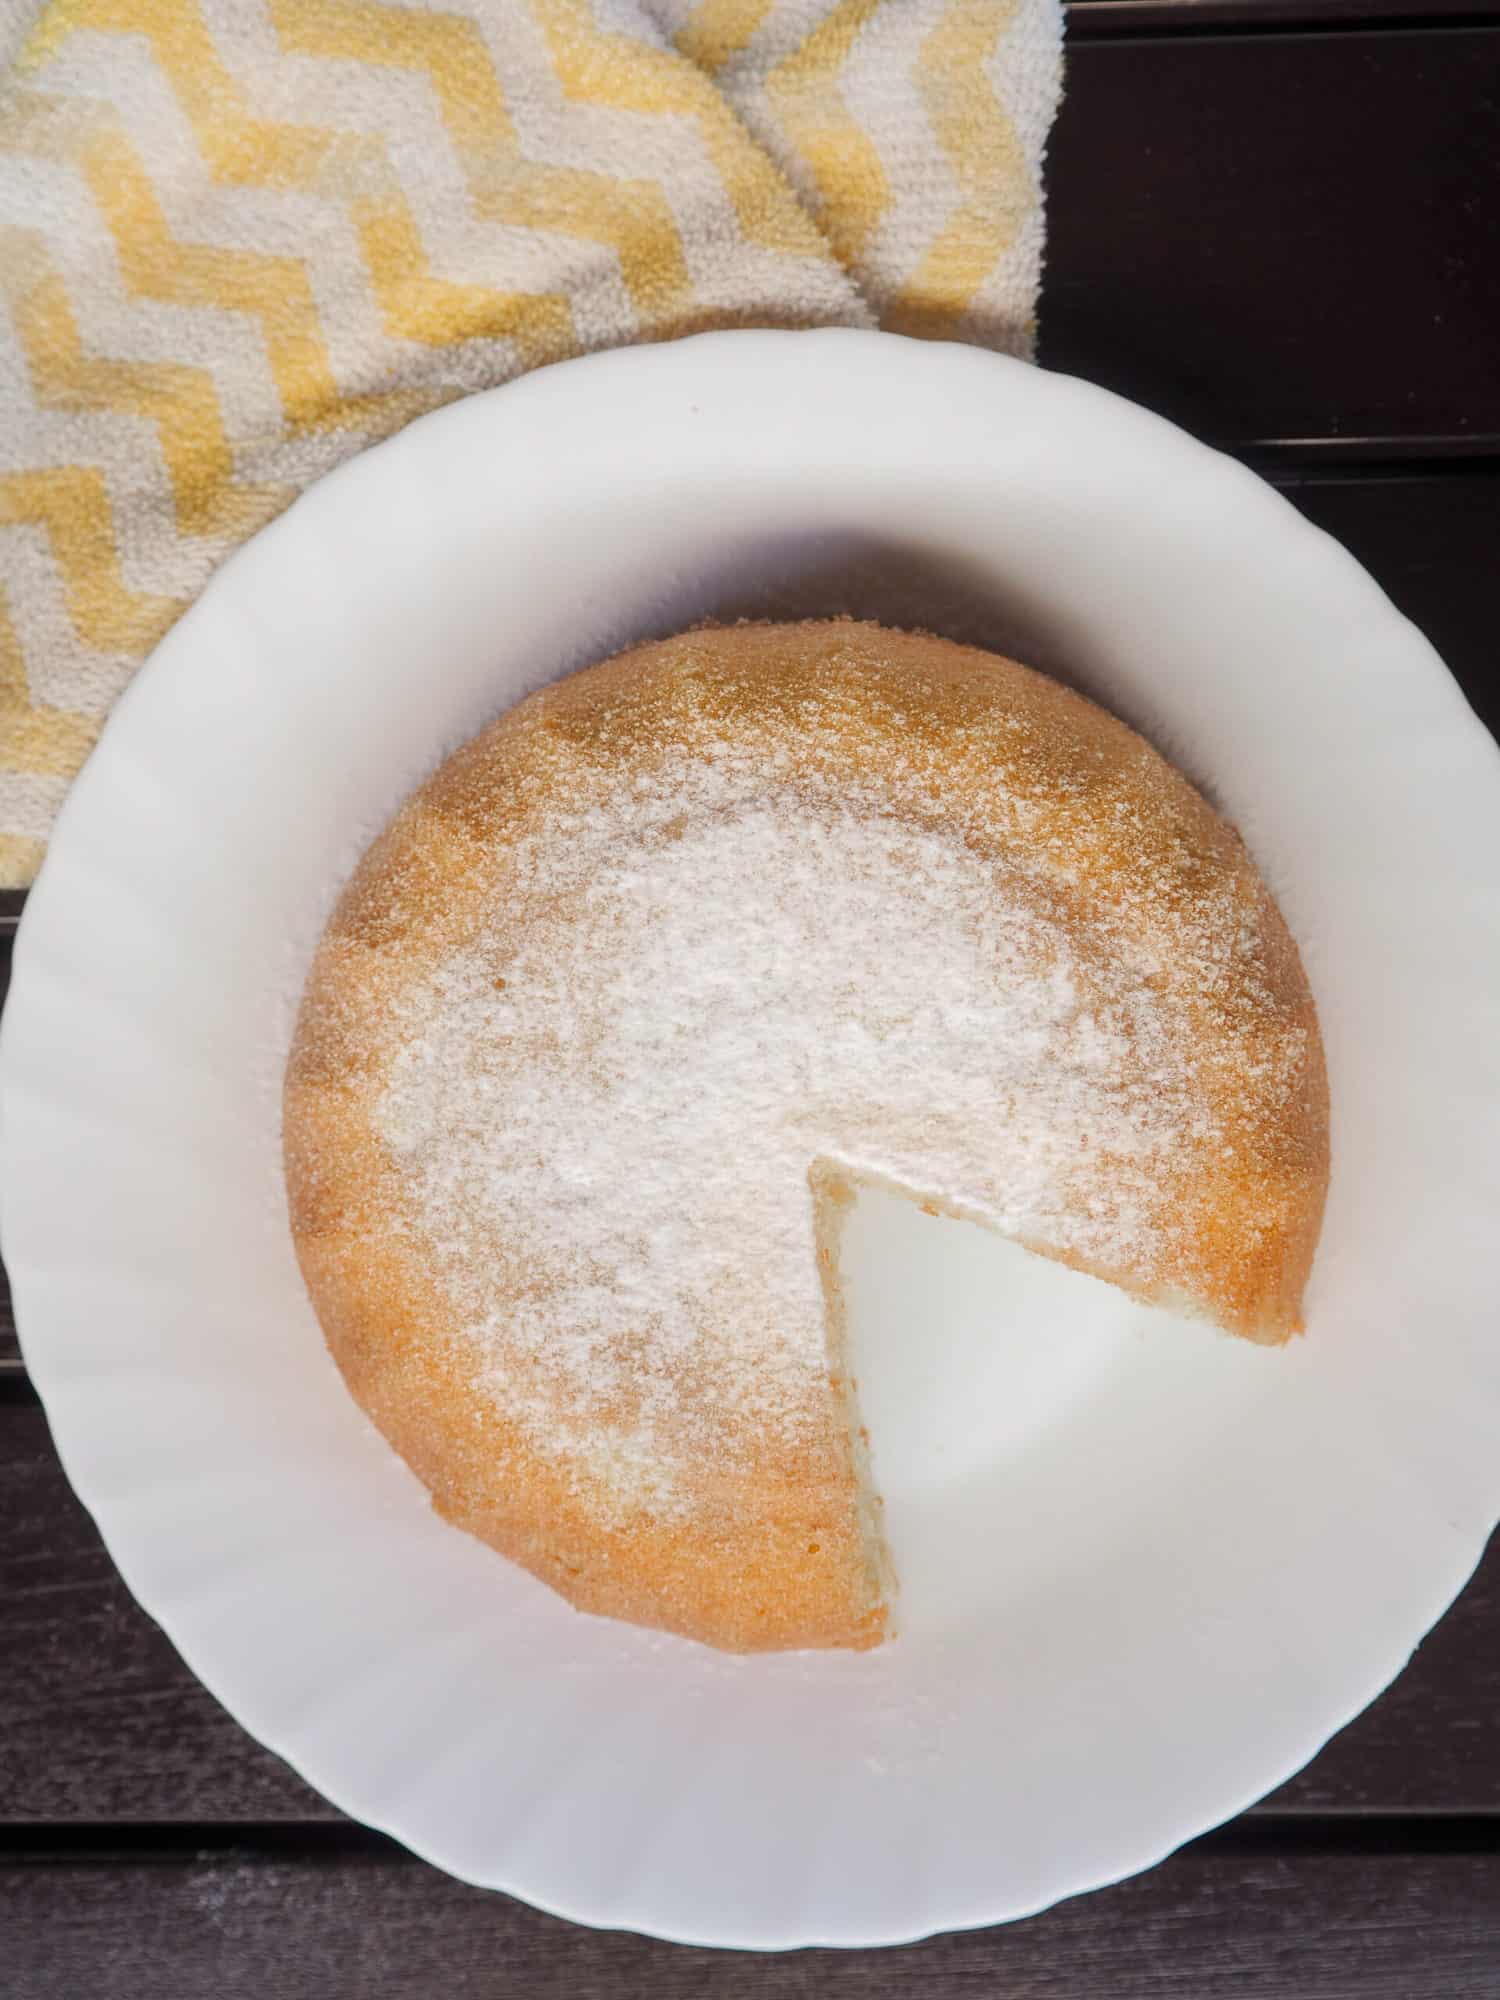 Top view of a bowl shaped old fashioned lemon pound cake with powdered sugar topping. A slice of the cake is cut out.